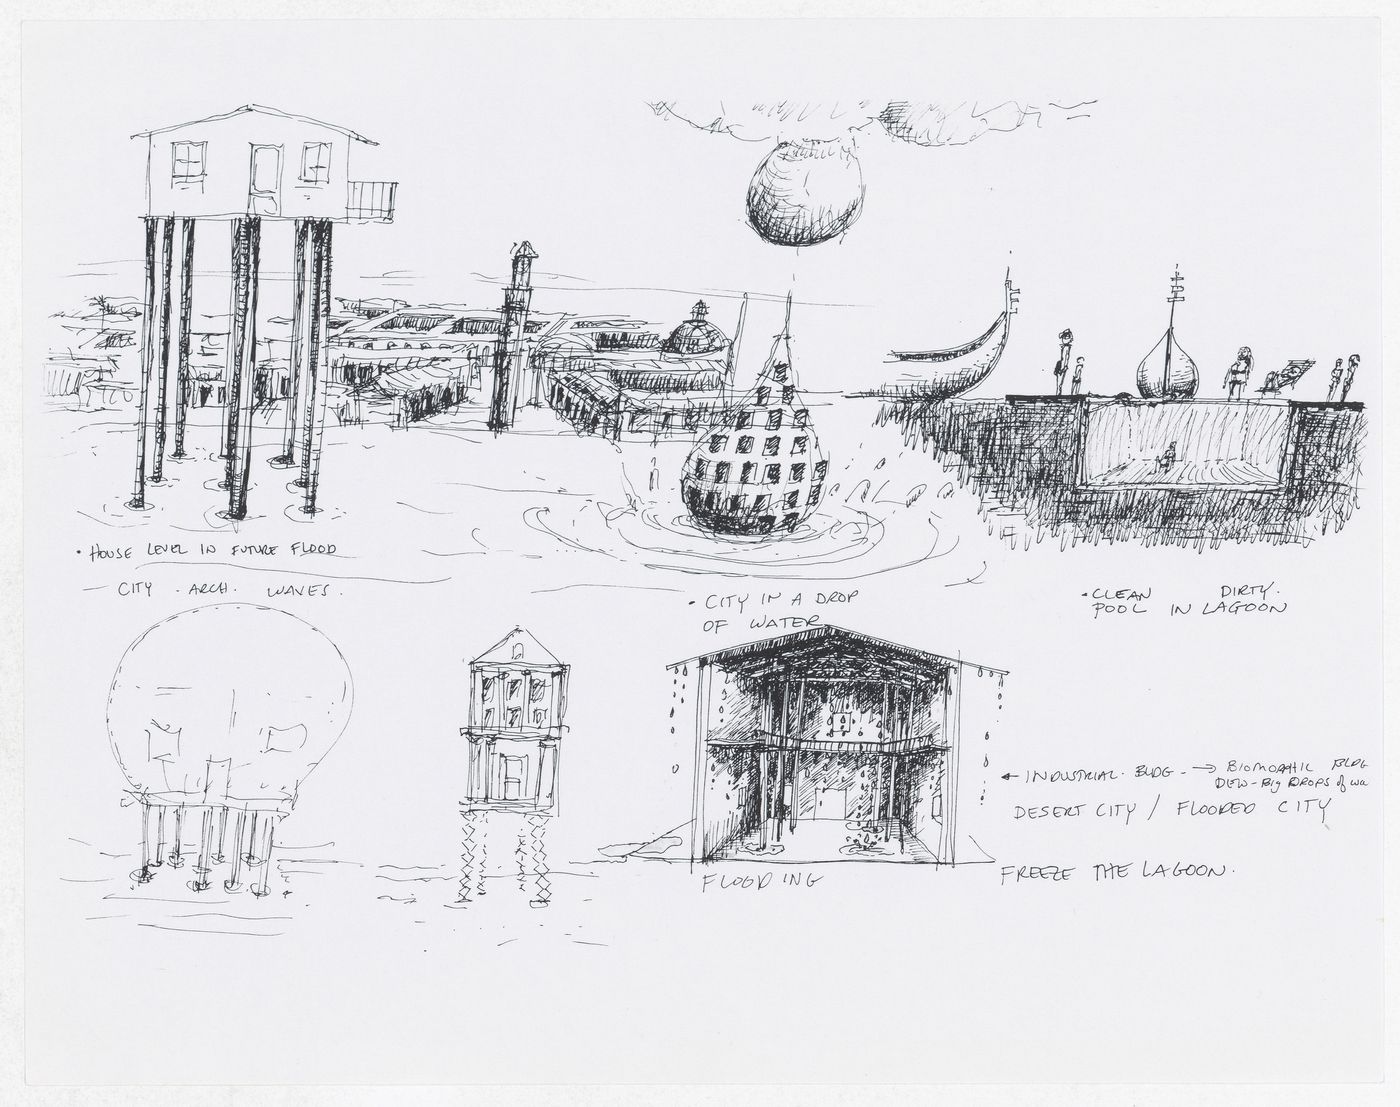 Drawing "Desert City / Flooded City" for the exhibition on James Wines at the Venice Biennale